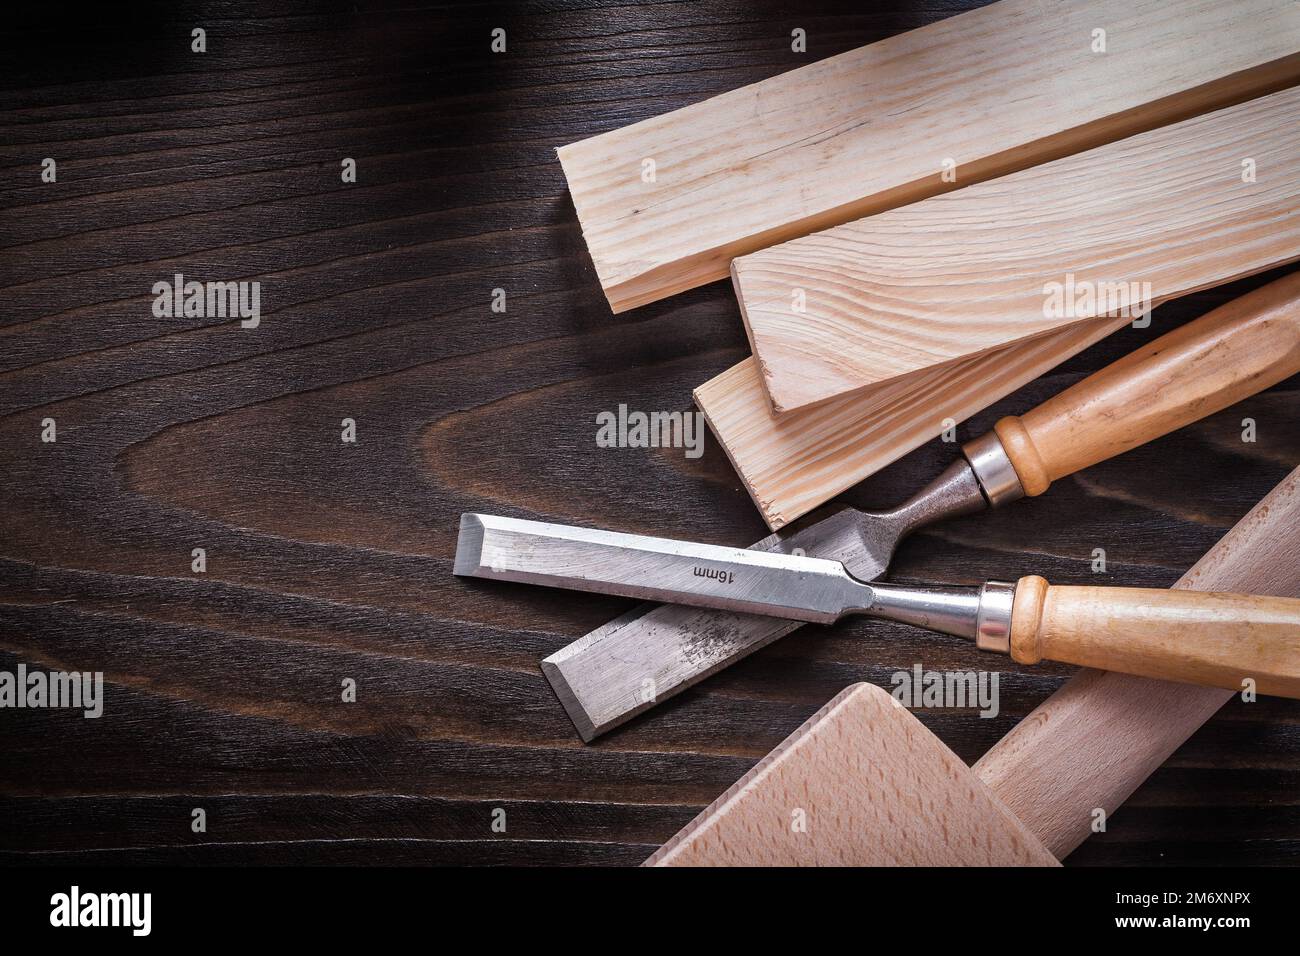 Lump hammer flat chisels and wooden bricks on brown vintage wood board construction concept. Stock Photo